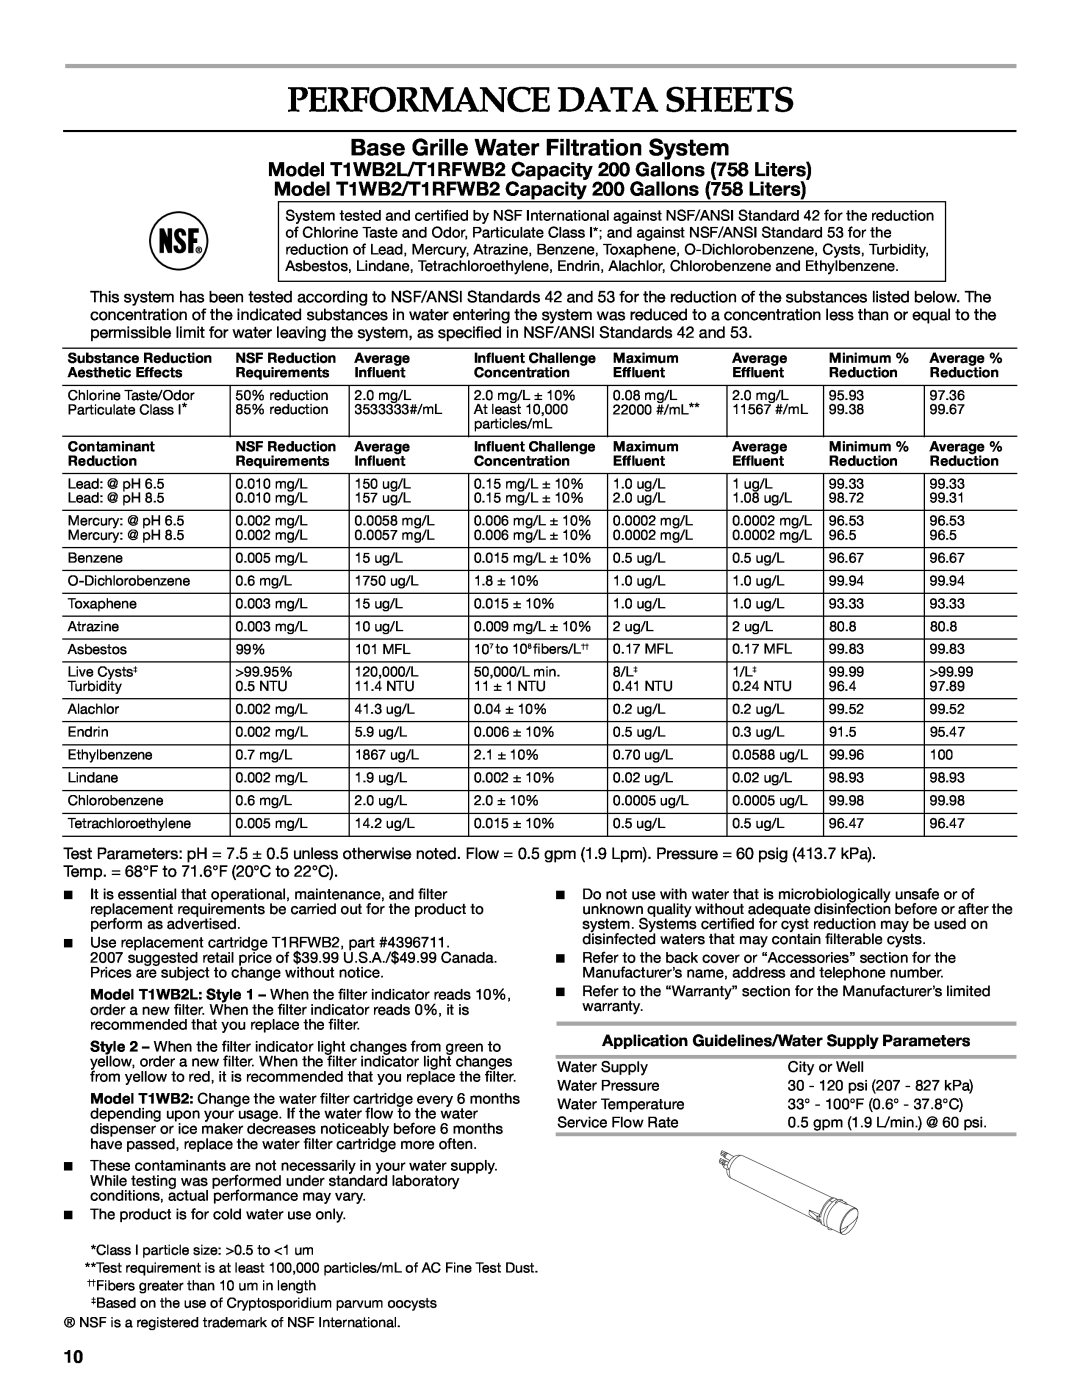 KitchenAid W10162434A warranty Performance Data Sheets, Base Grille Water Filtration System 